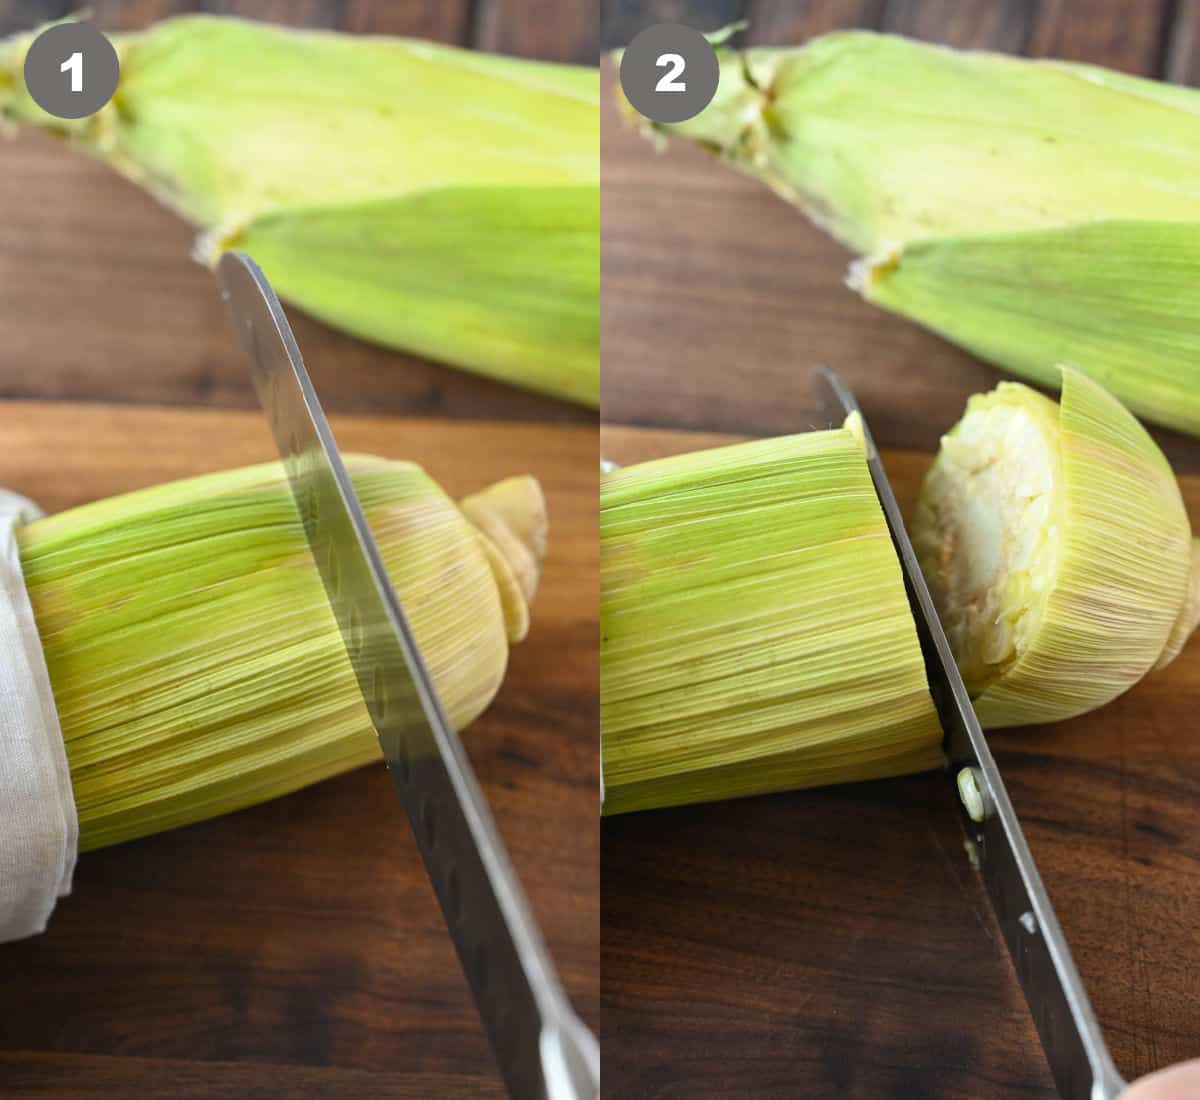 Corn that has been cooked and the end cut off.